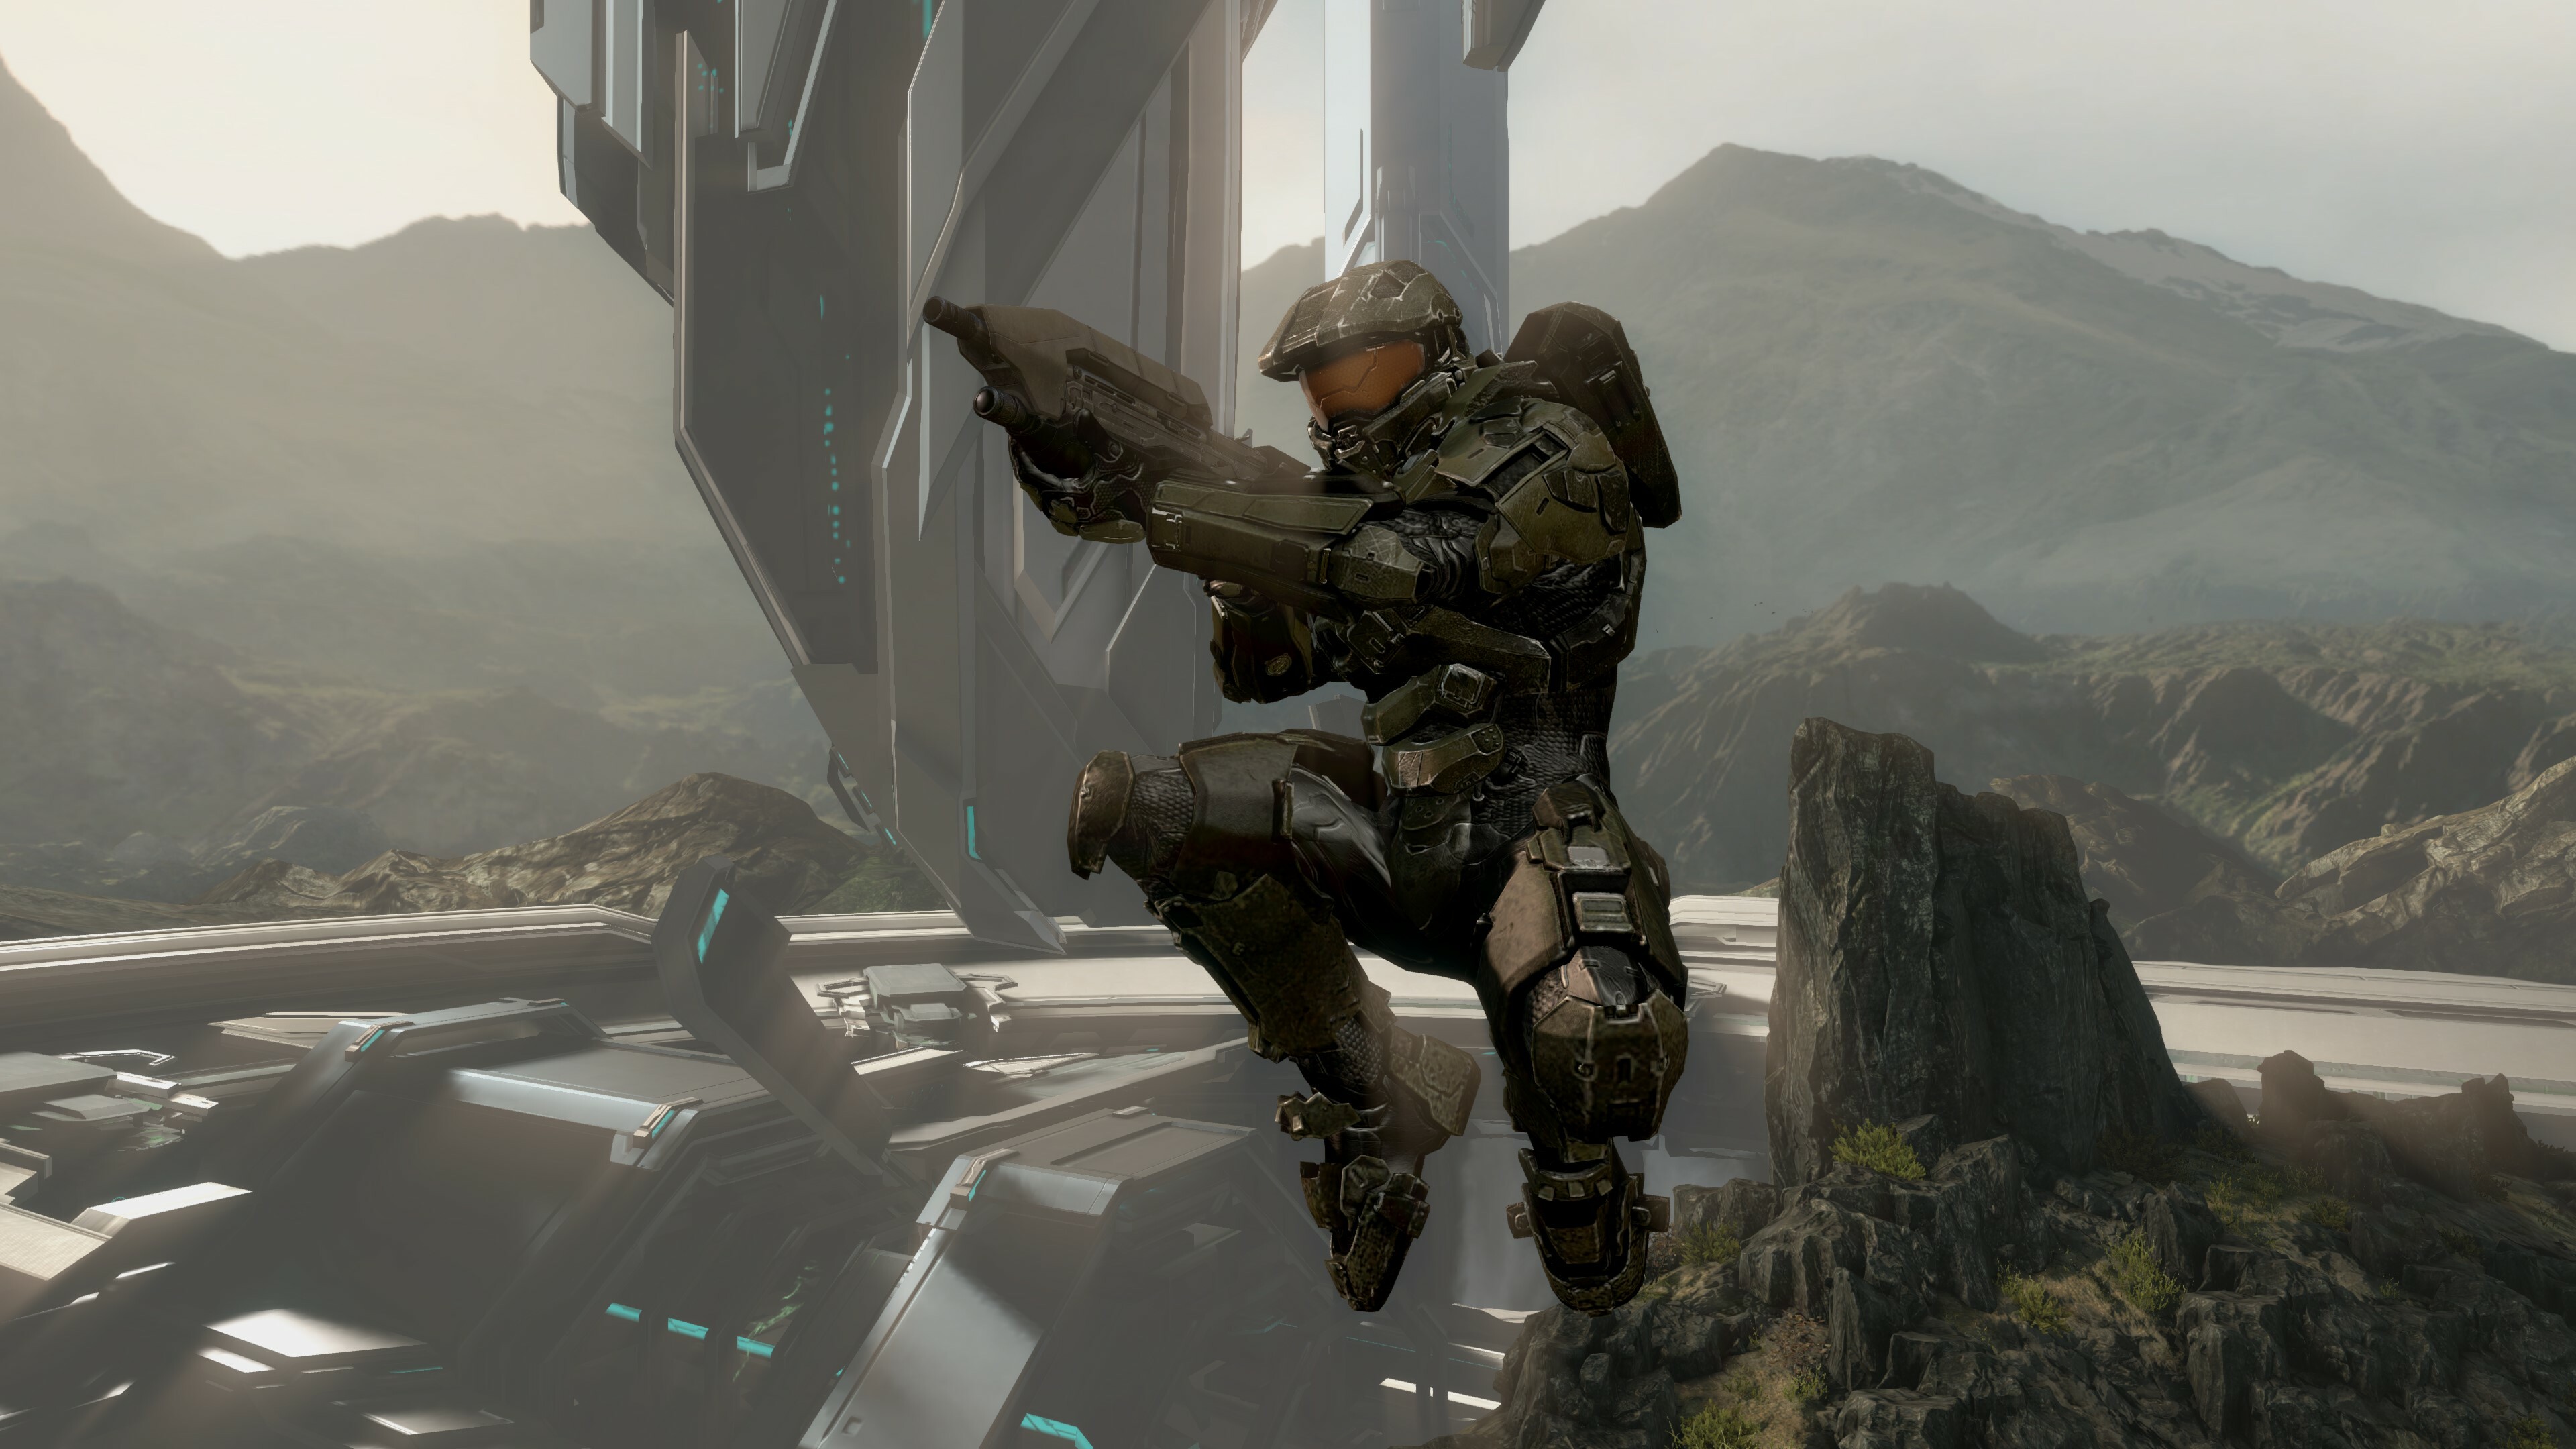 Halo 4 joins The Master Chief Collection fully remastered next week for PC,  halo serie 